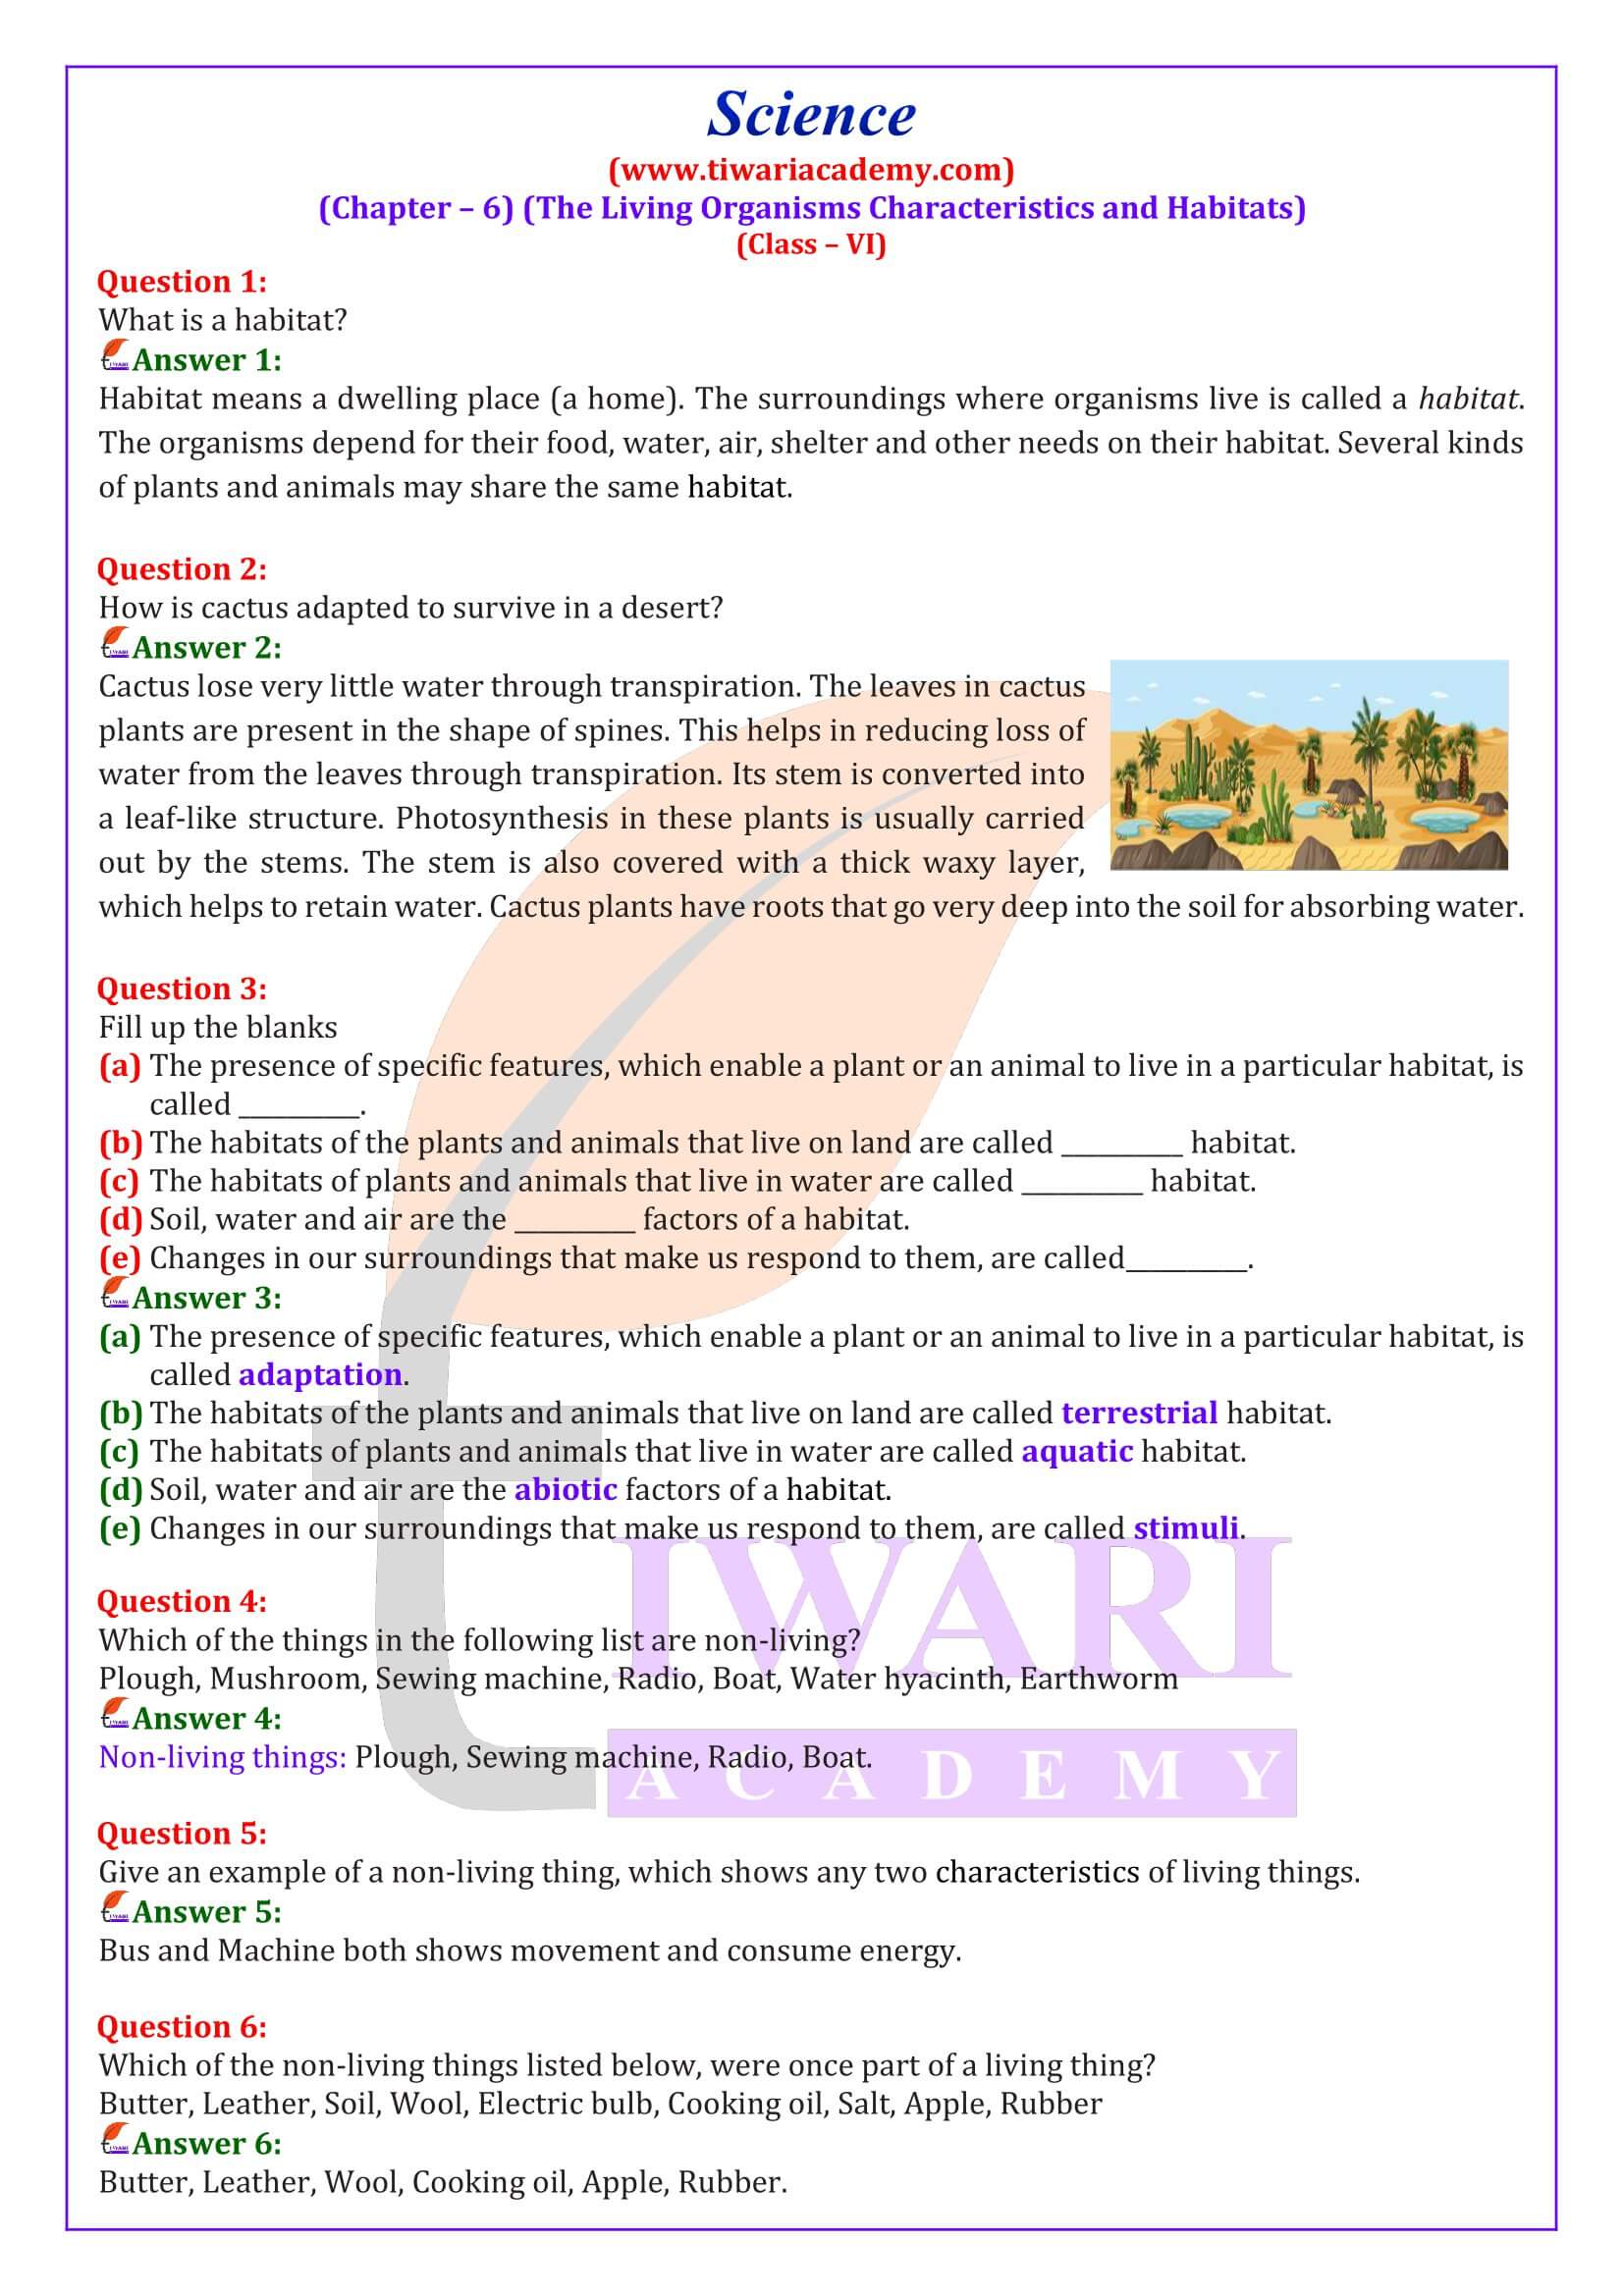 NCERT Solutions for Class 6 Science Chapter 6